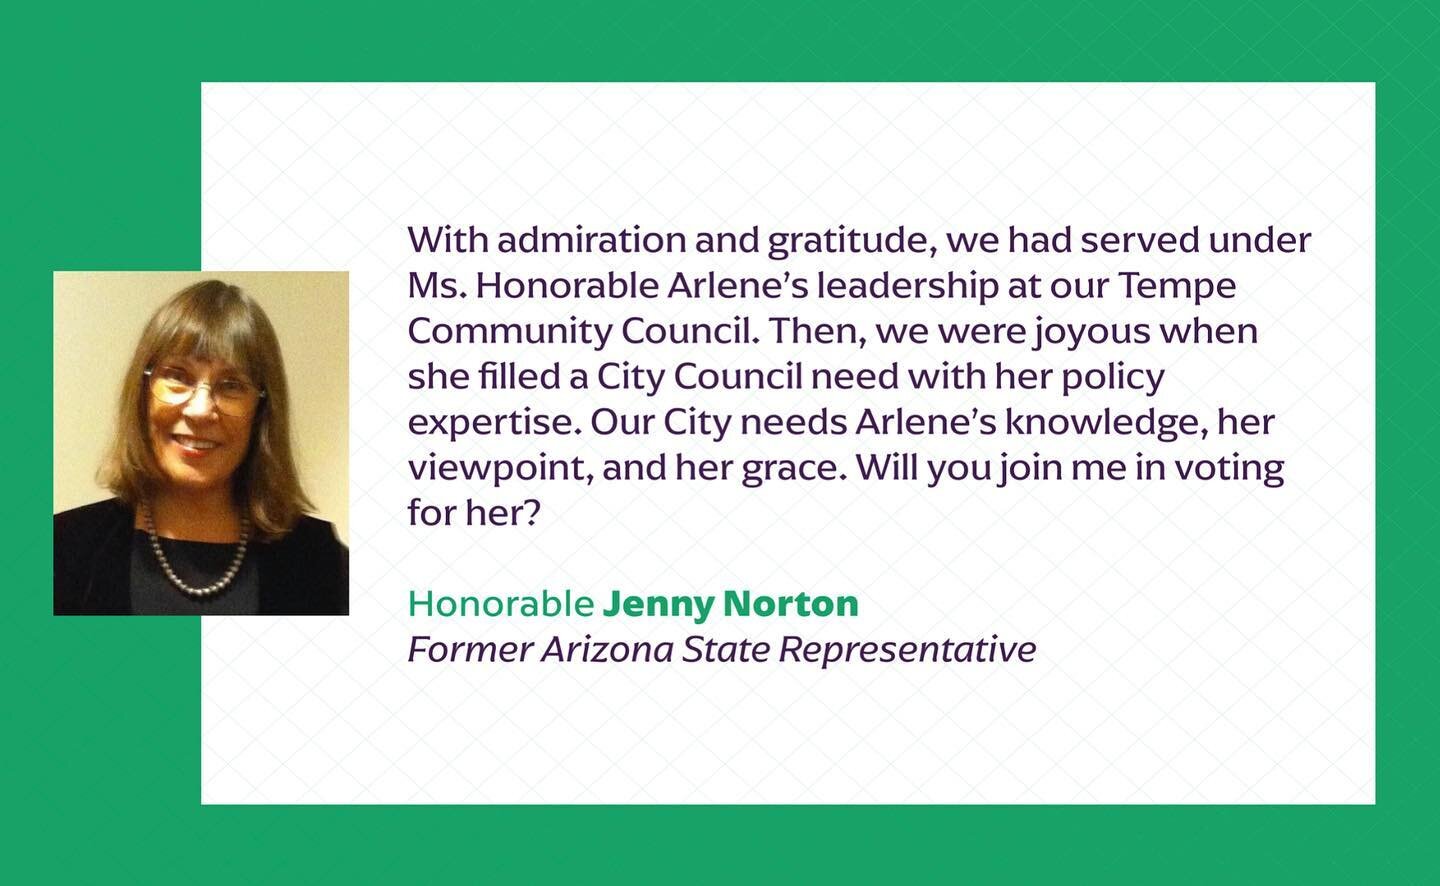 You are one of Tempe's greatest treasures and I'm so honored to have your gracious endorsement, Jenny. From the bottom of my heart - thank you!!

#WinWithChin✅✅✅

arlenefortempe.com 

#tempe #tempeaz #tempearizona #southtempe #downtowntempe #downtown